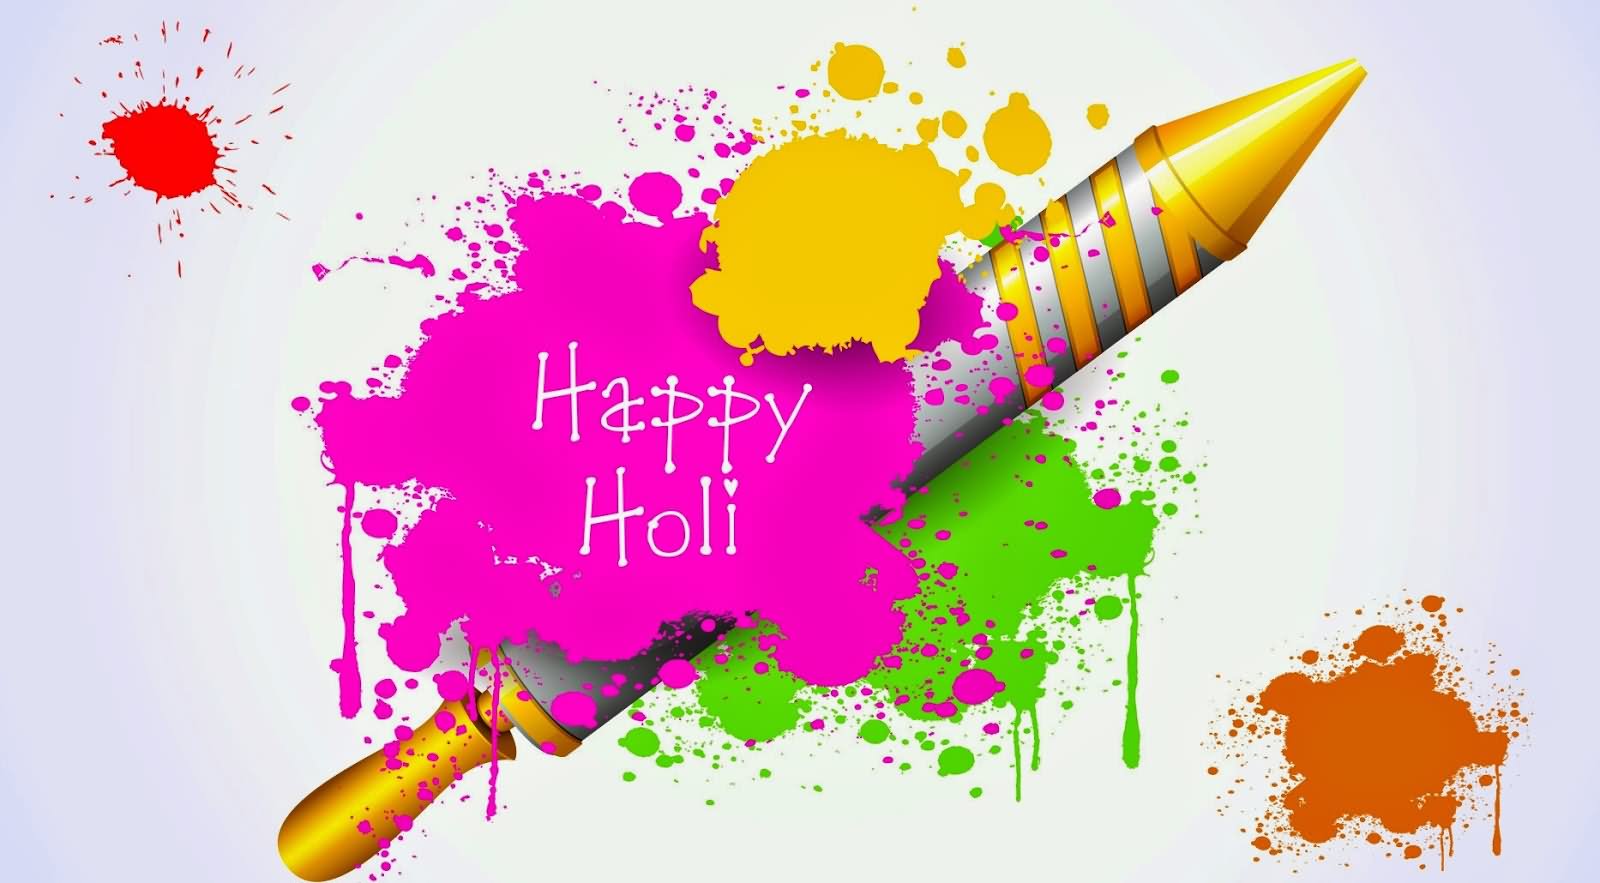 Happy Holi 2022 Image, Quotes, Wishes, Greetings, Messages, Shayari and Whatsapp Status